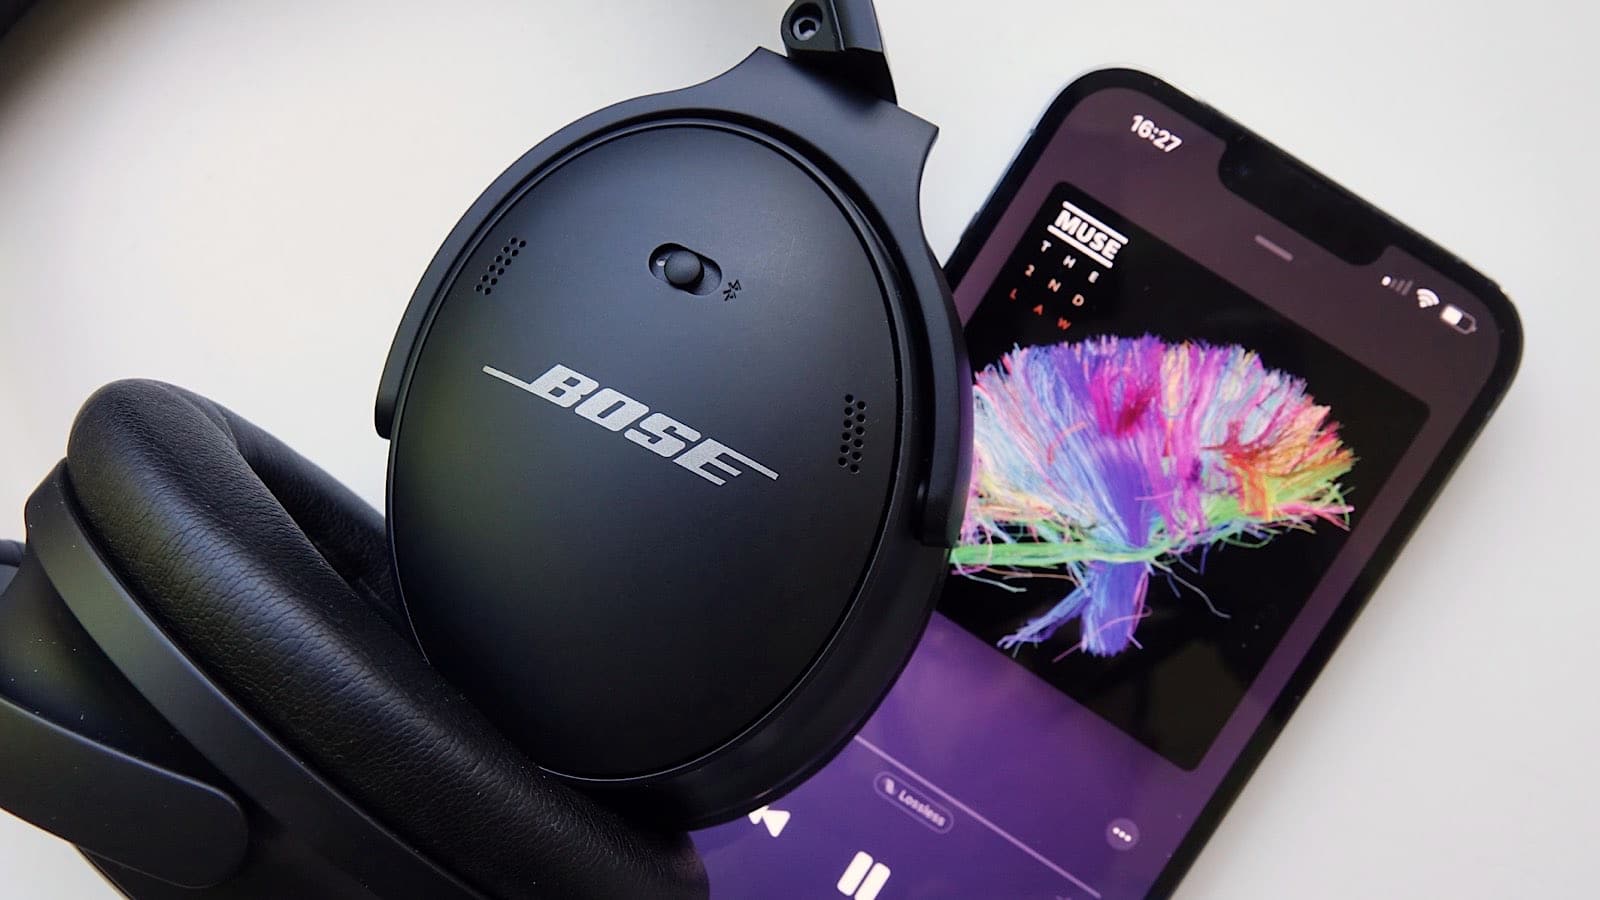 Bose QuietComfort 45 review: A great noise-cancelling headphone